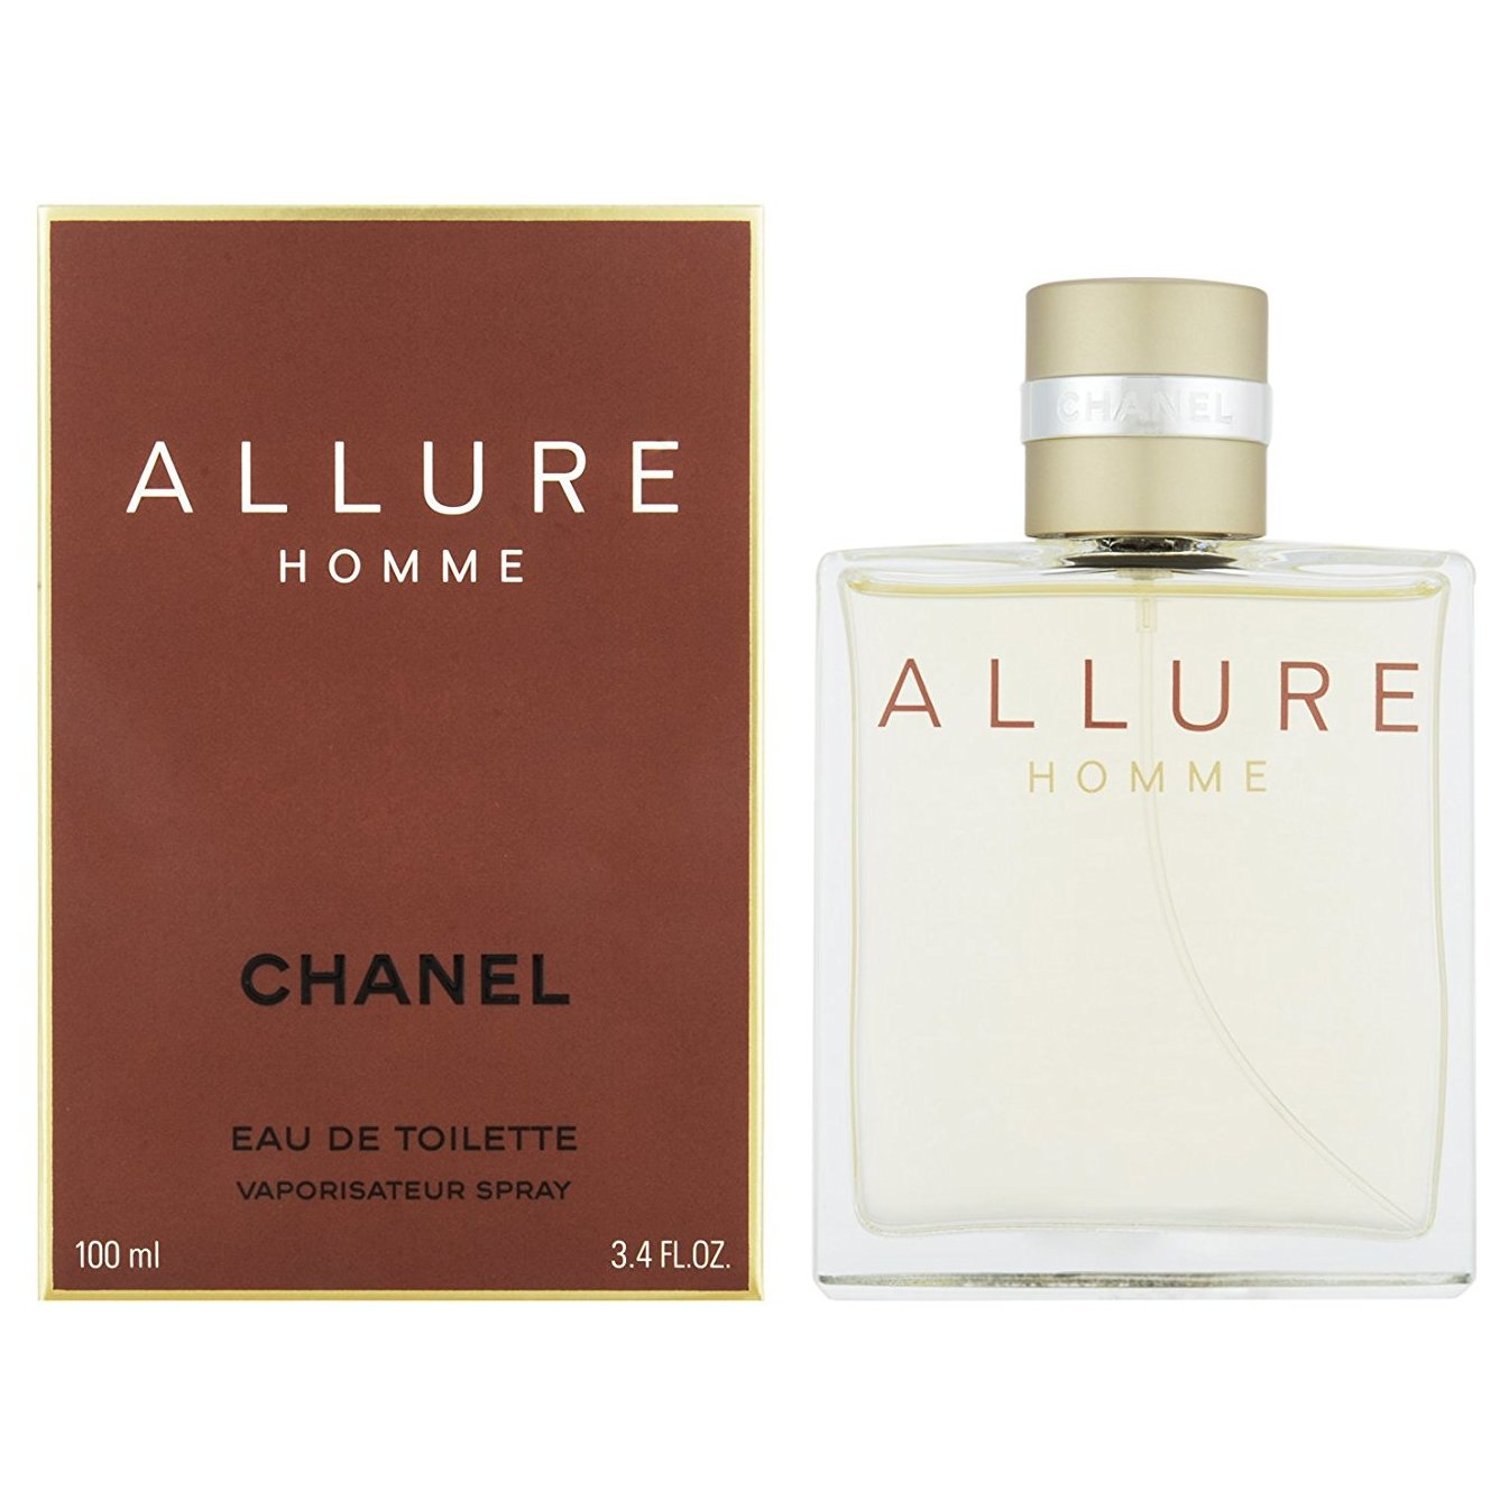 Allure Homme Perfume EDT Spray for Men 100 ml by Chanel